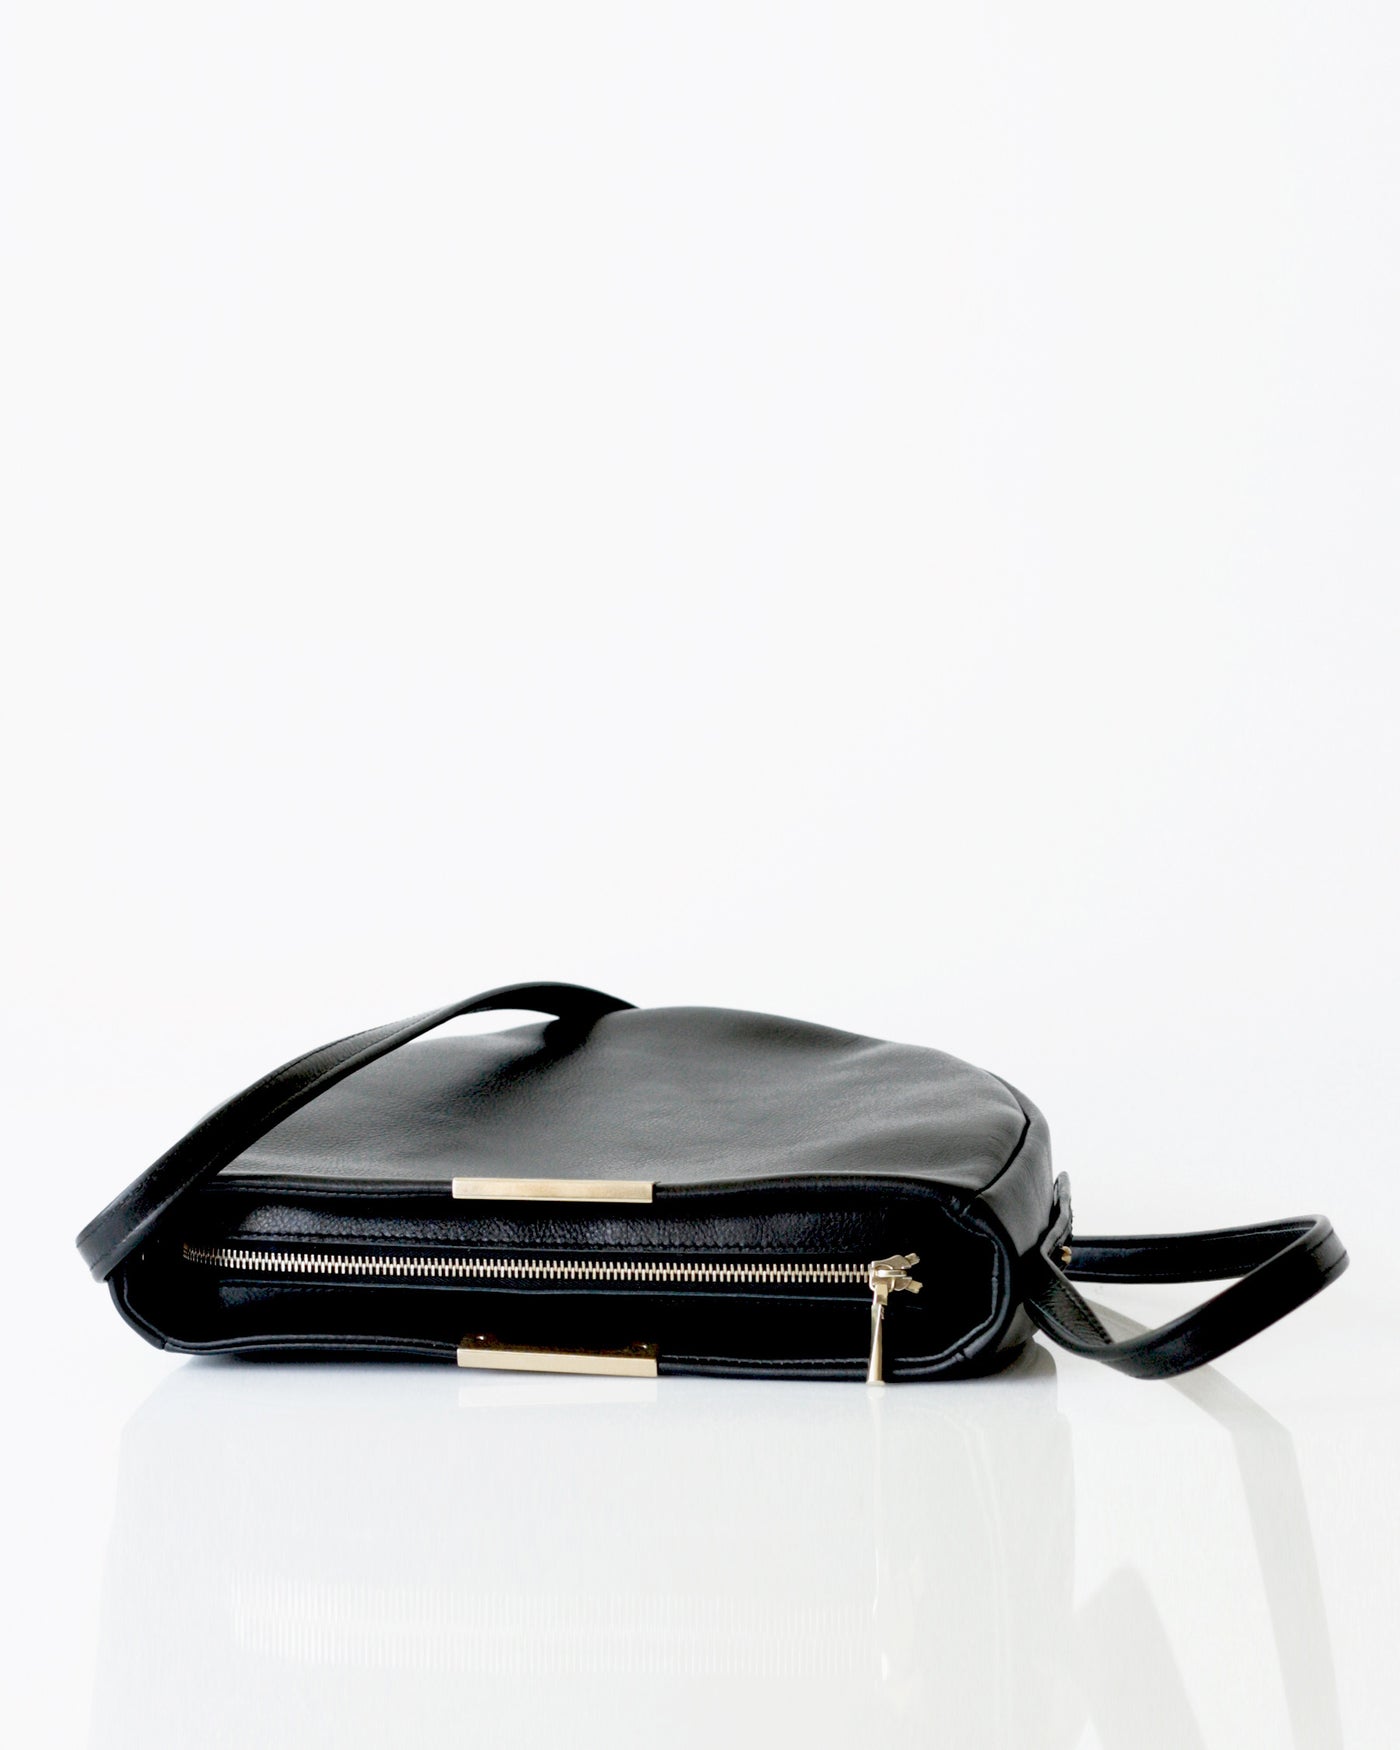 Meena Saddle Bag - Opelle bag Permanent Collection - Opelle leather handbag handcrafted leather bag toronto Canada